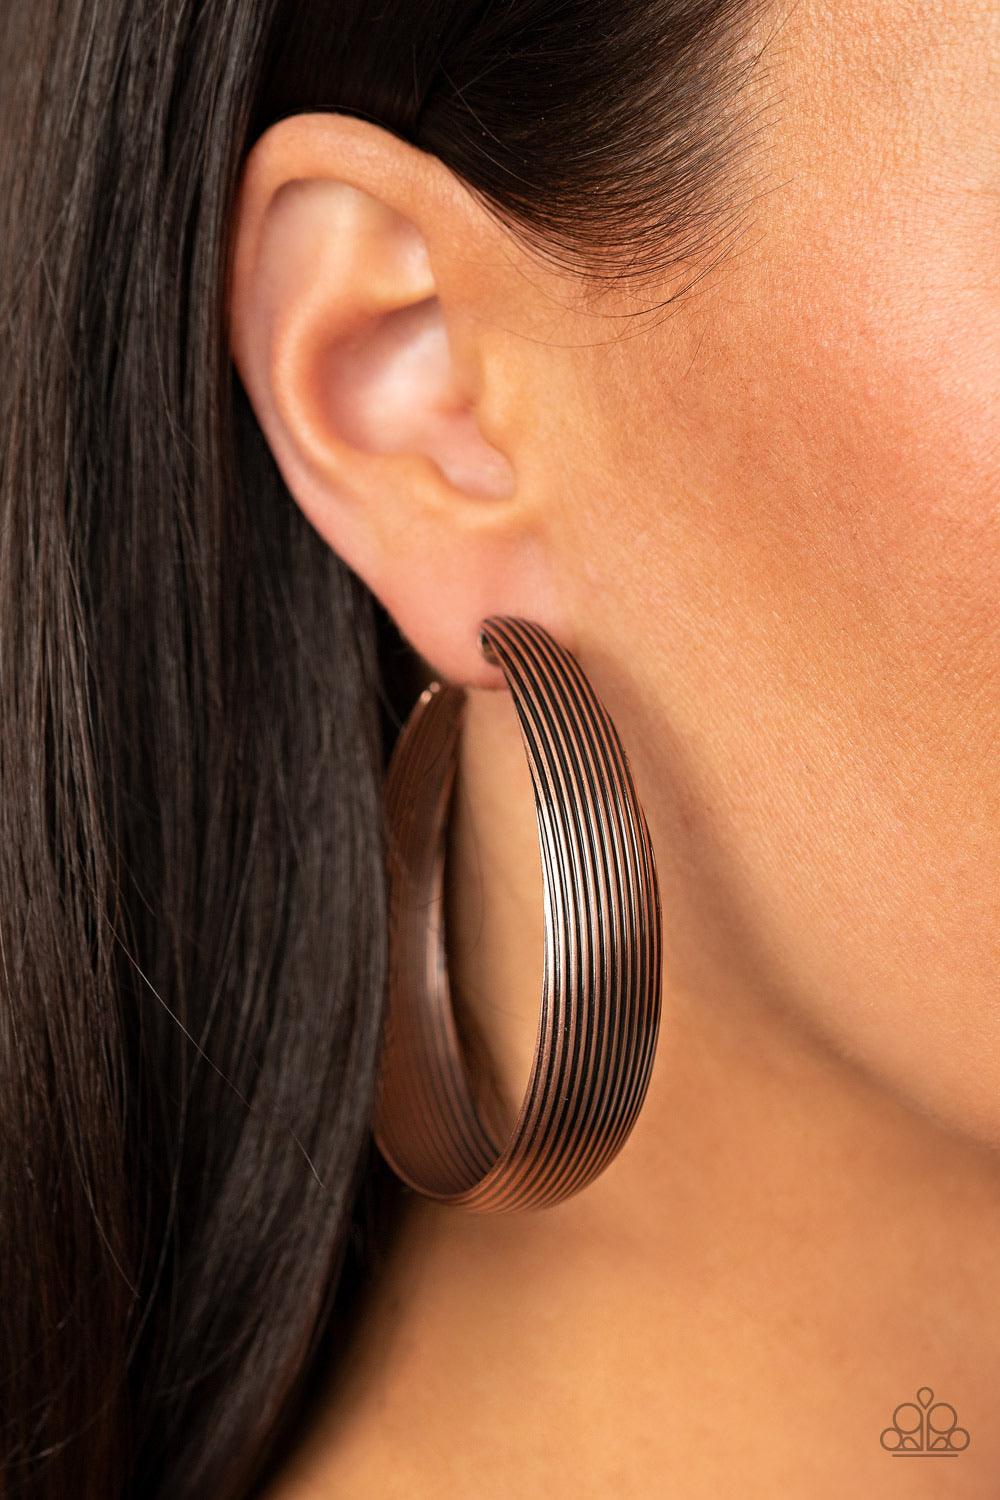 Paparazzi Accessories Desert Wandering - Copper Lined in antiqued ridges, a thick copper hoop curls around the ear for an authentically rustic look. Earring attaches to a standard post fitting. Hoop measures approximately 2 ¼” in diameter. Sold as one pai